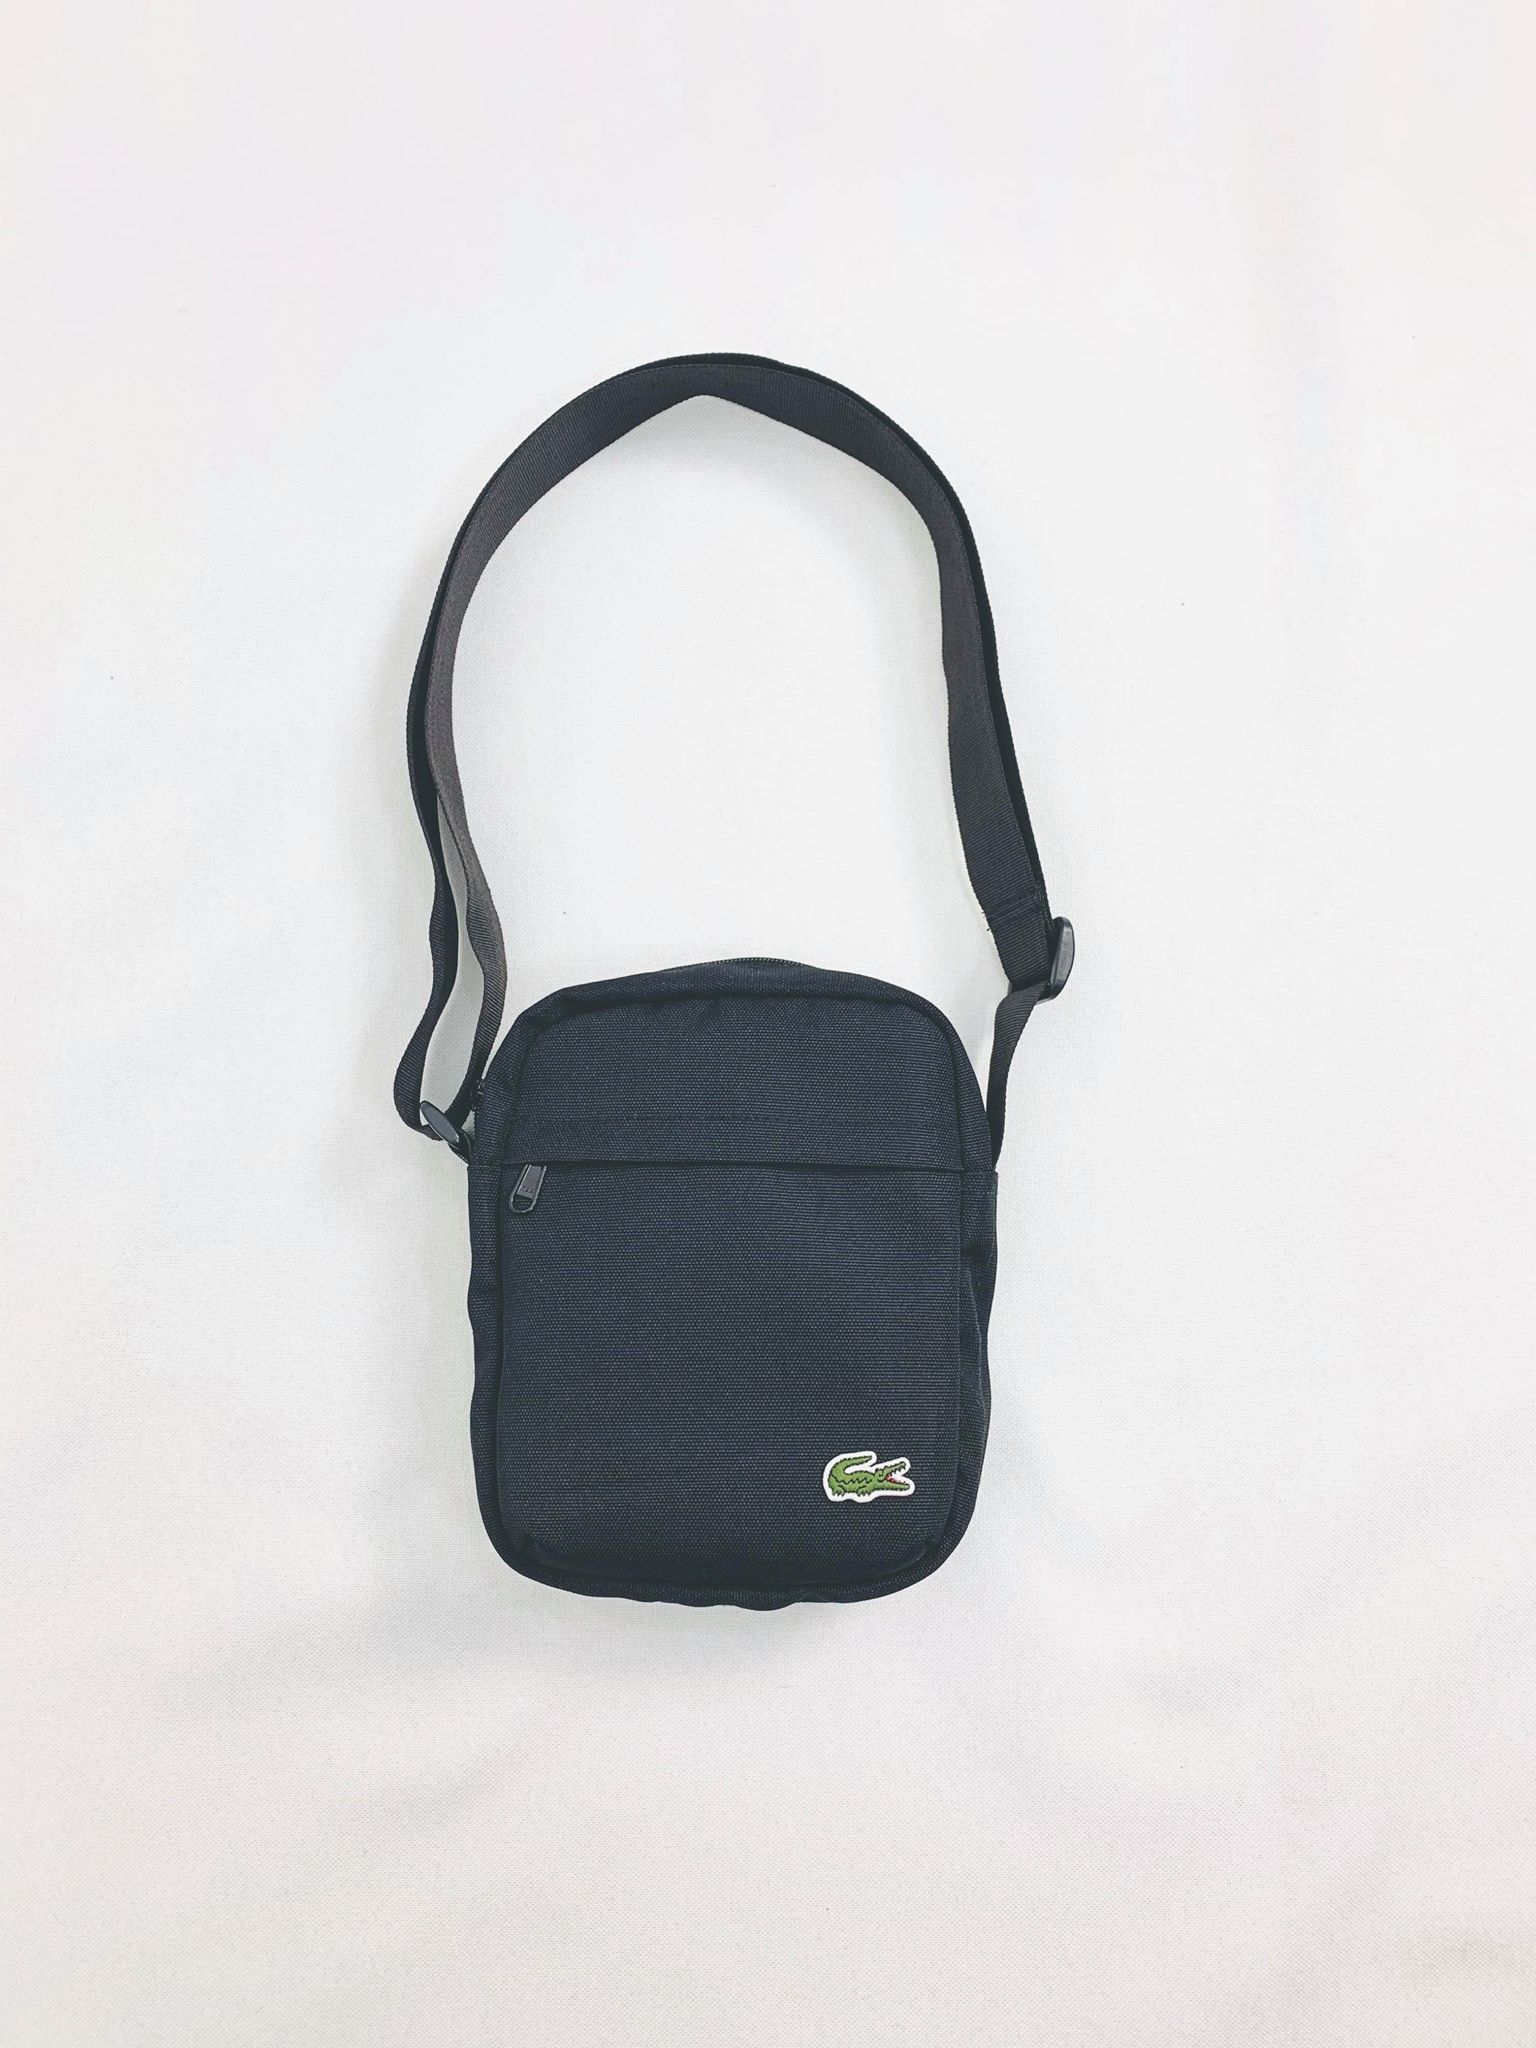 lacoste body bag philippines